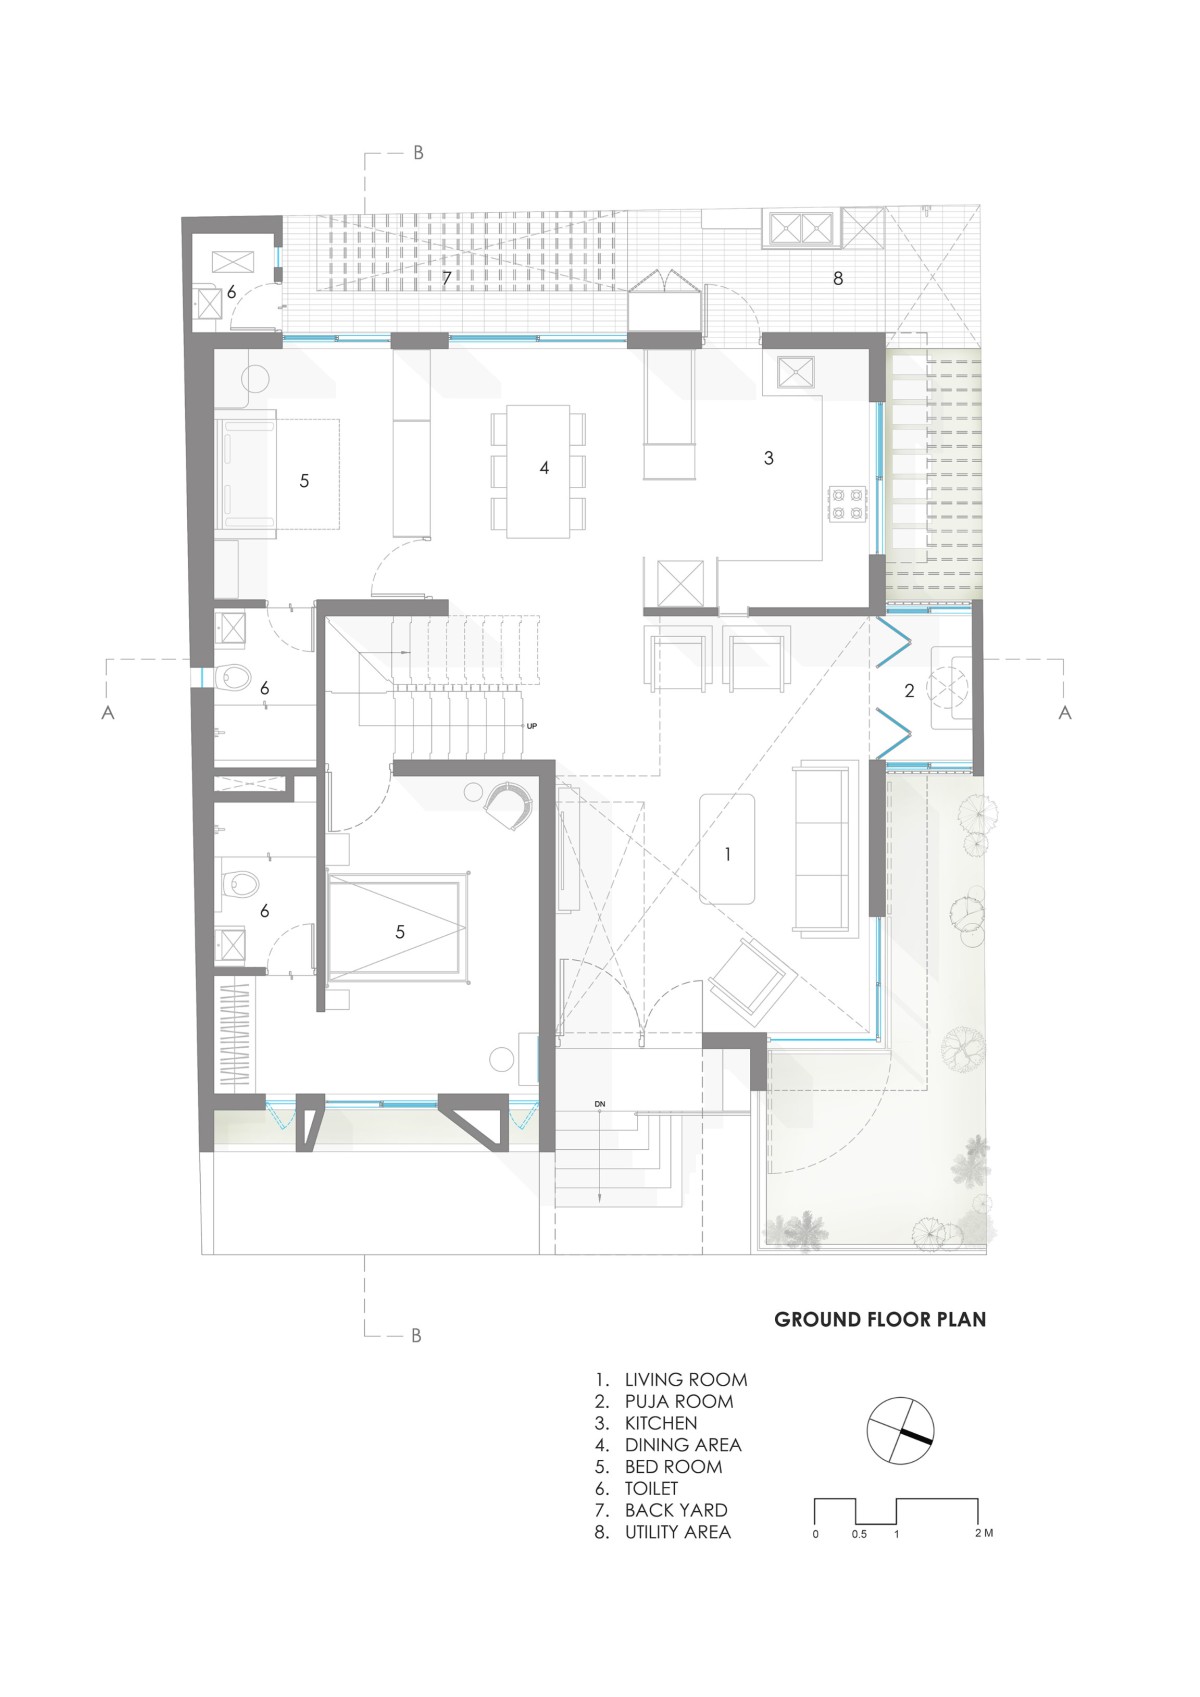 Ground floor plan of The White Bleached House by Neogenesis+Studi0261